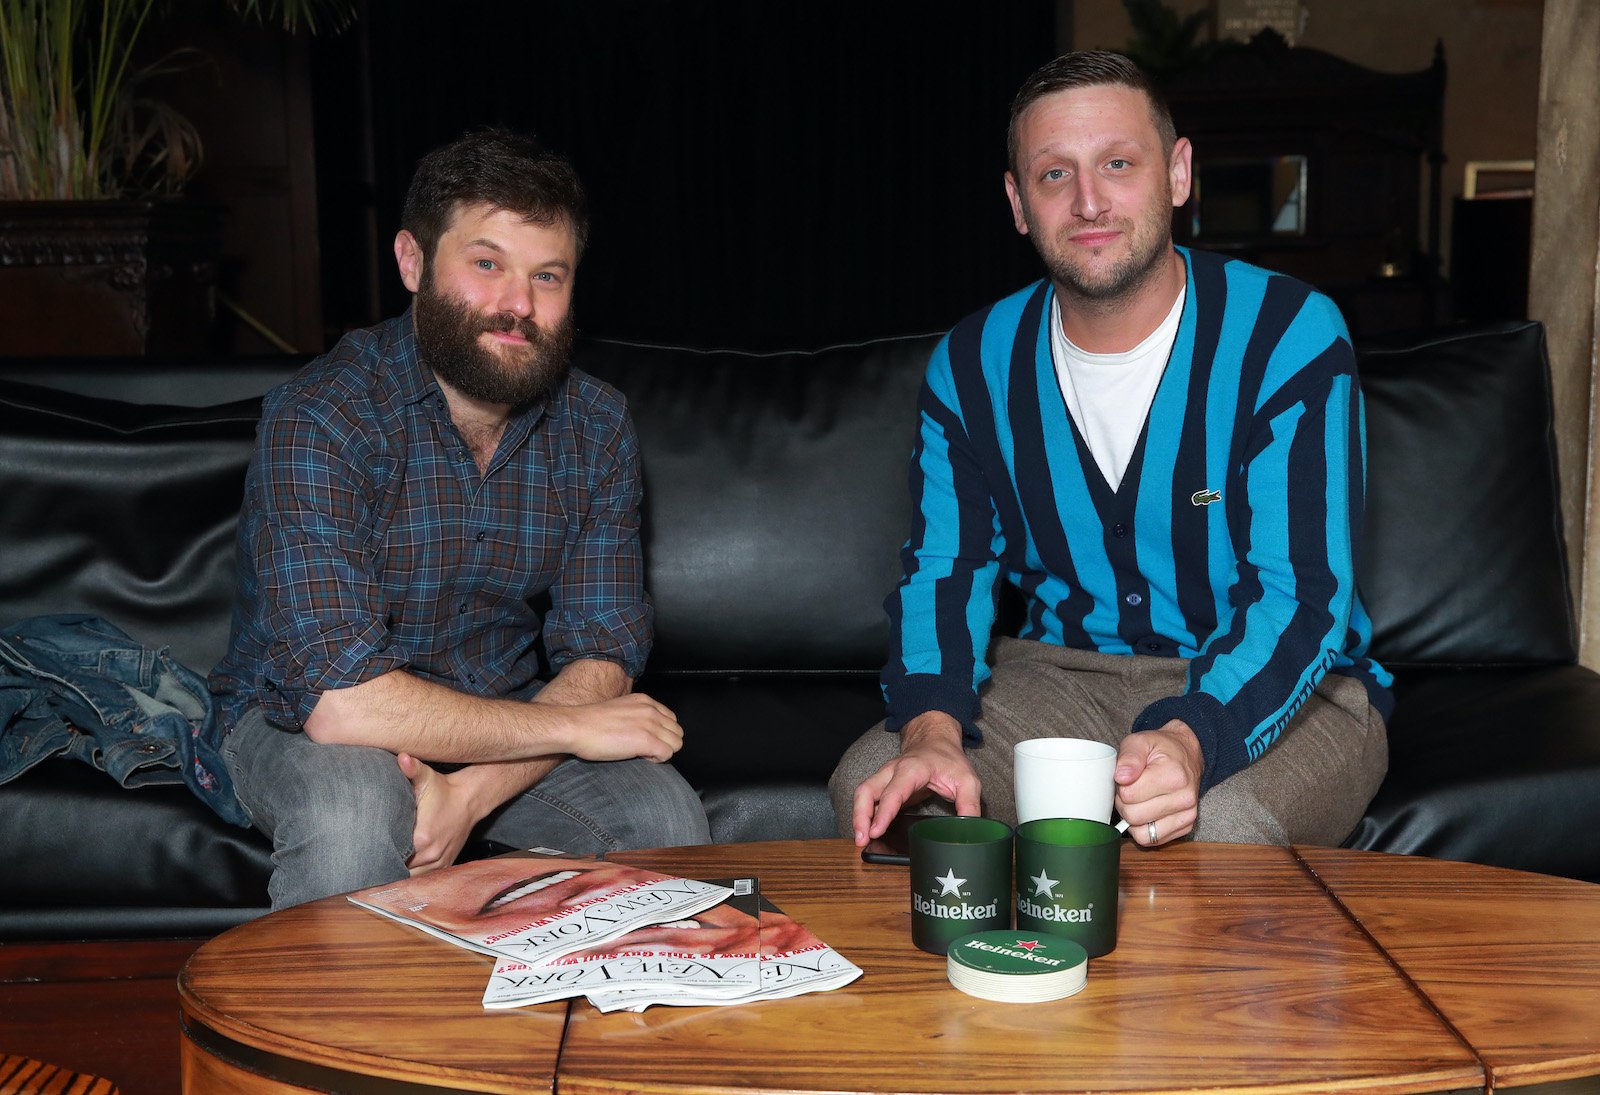 Tim Robinson and Zach Kanin from I Think You Should Leave